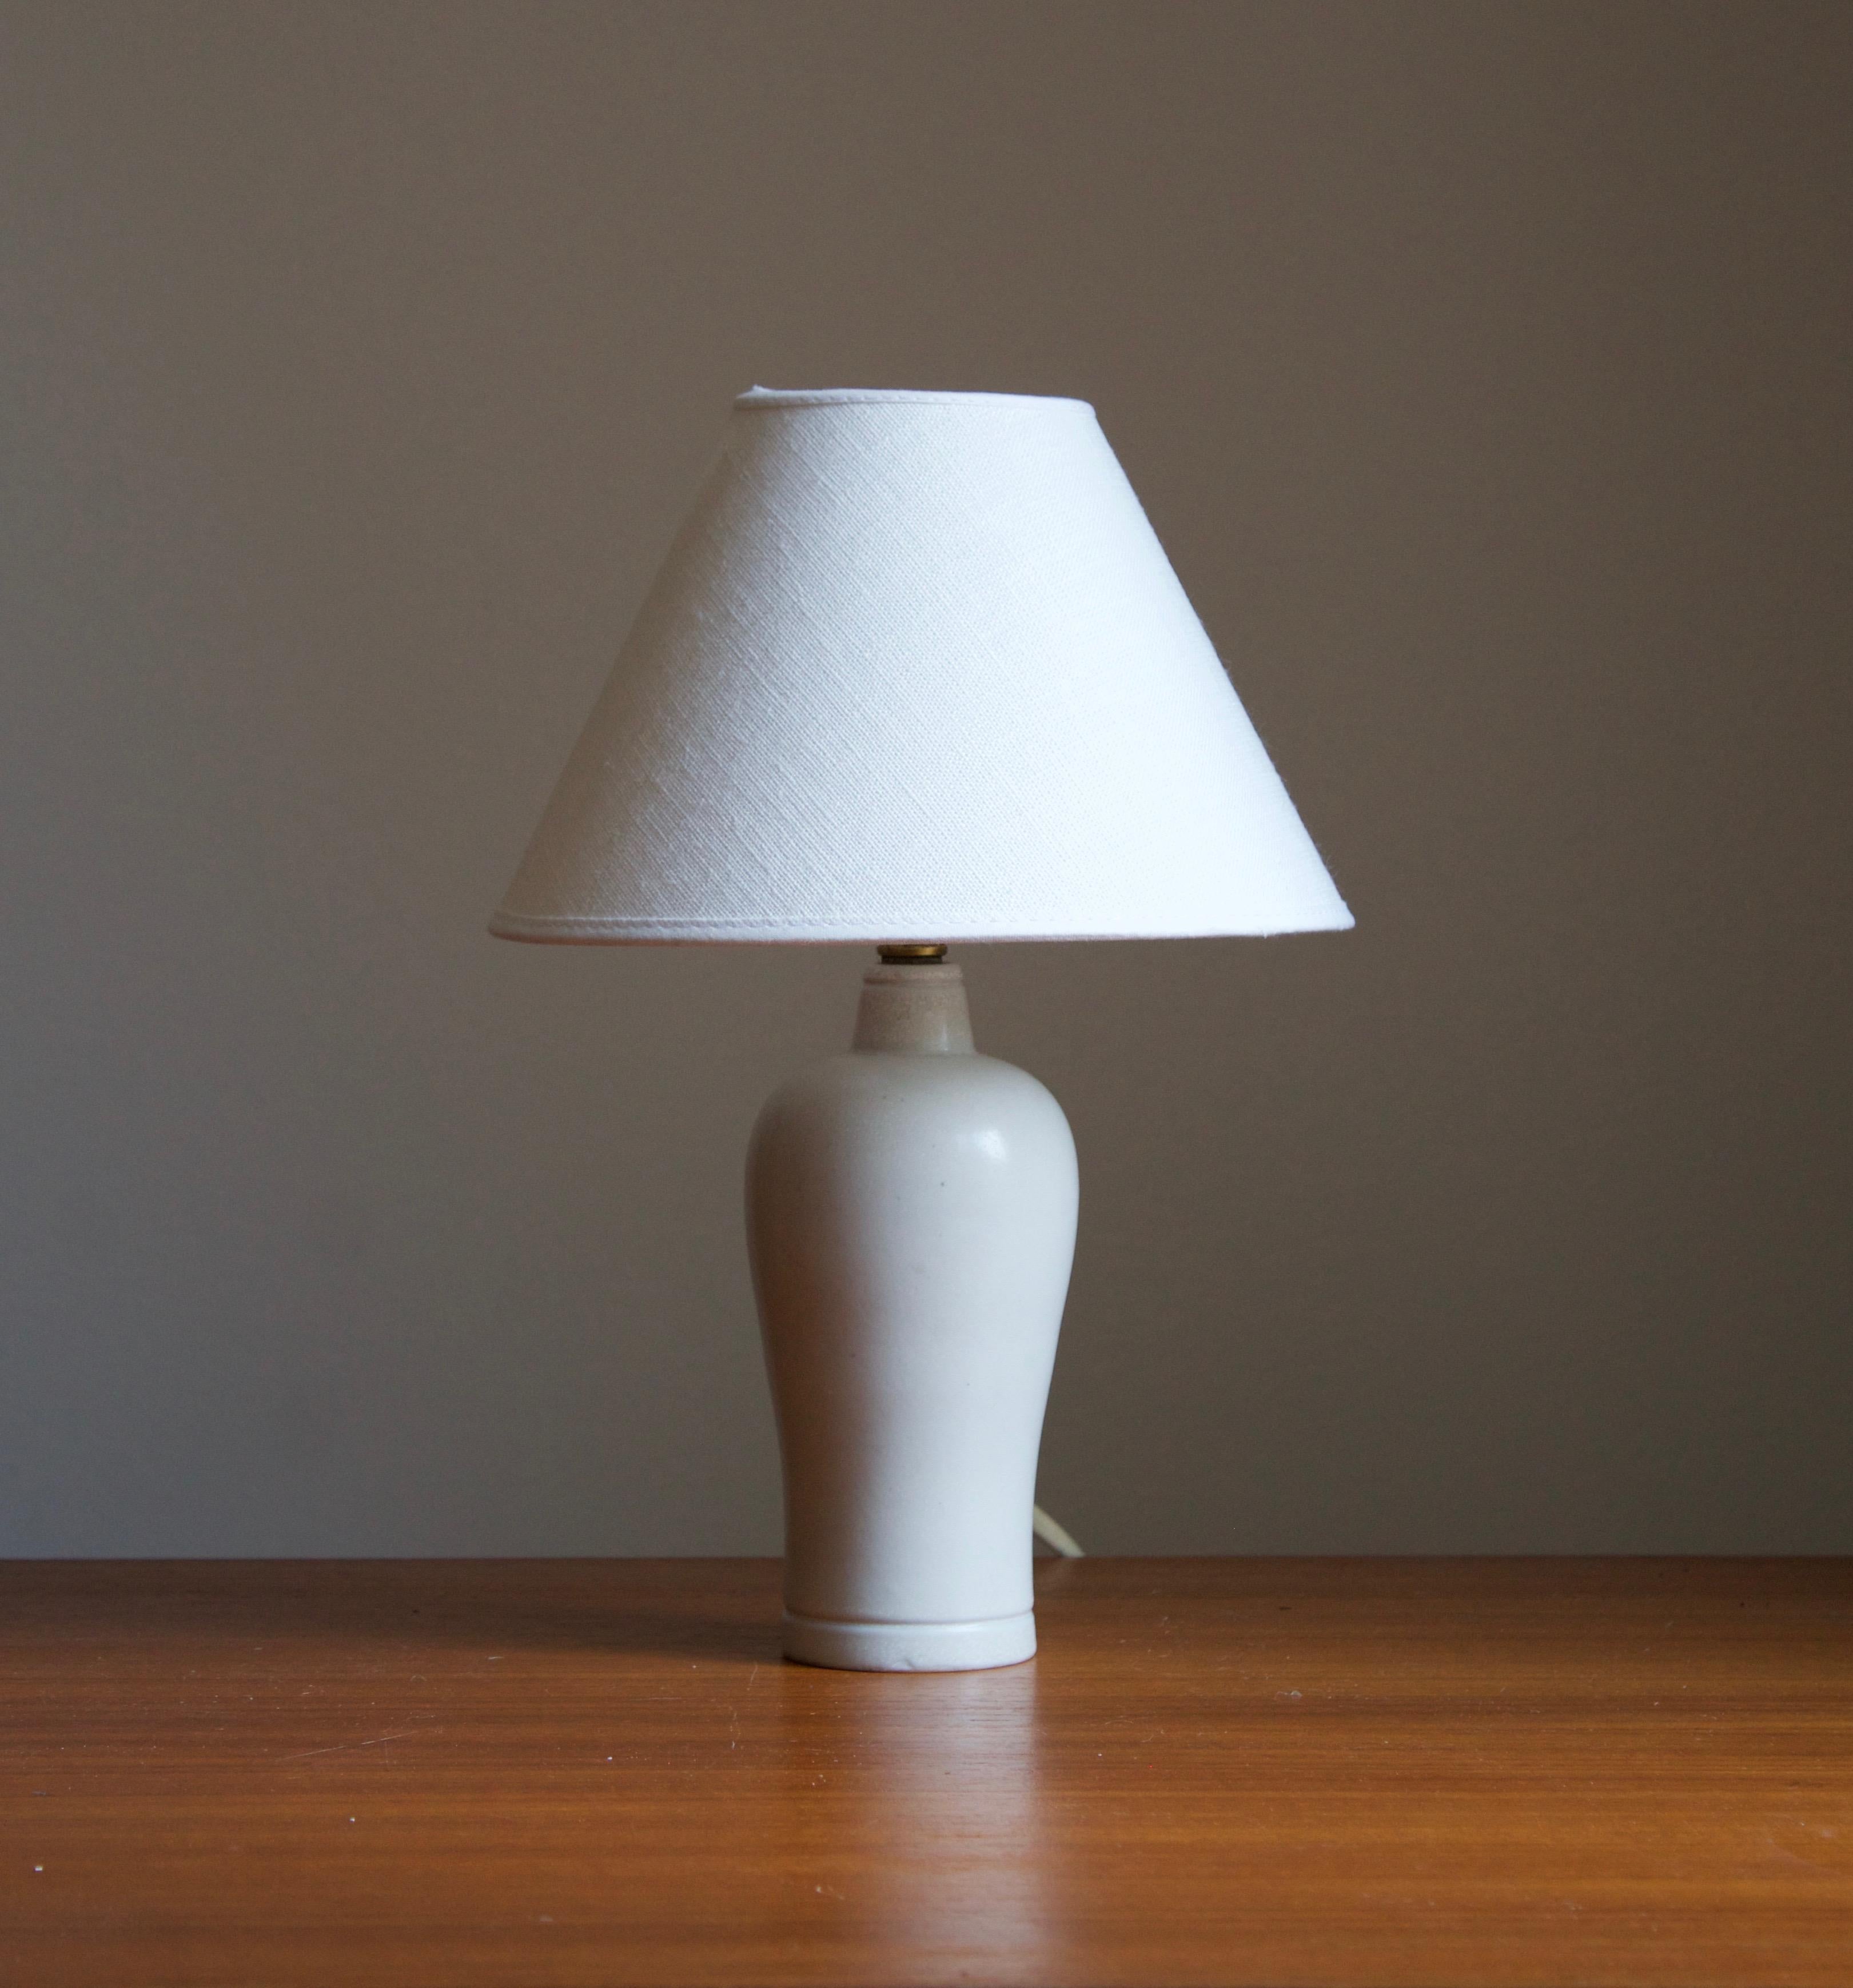 A table lamp produced by Rörstrand, Sweden, 1950s. Designed by Gunnar Nylund, (Swedish, 1914-1997). Signed. 

Stated dimensions exclude lampshade, height includes socket. Sold without lampshade.

Nylund served as artistic director at Rörstrand,